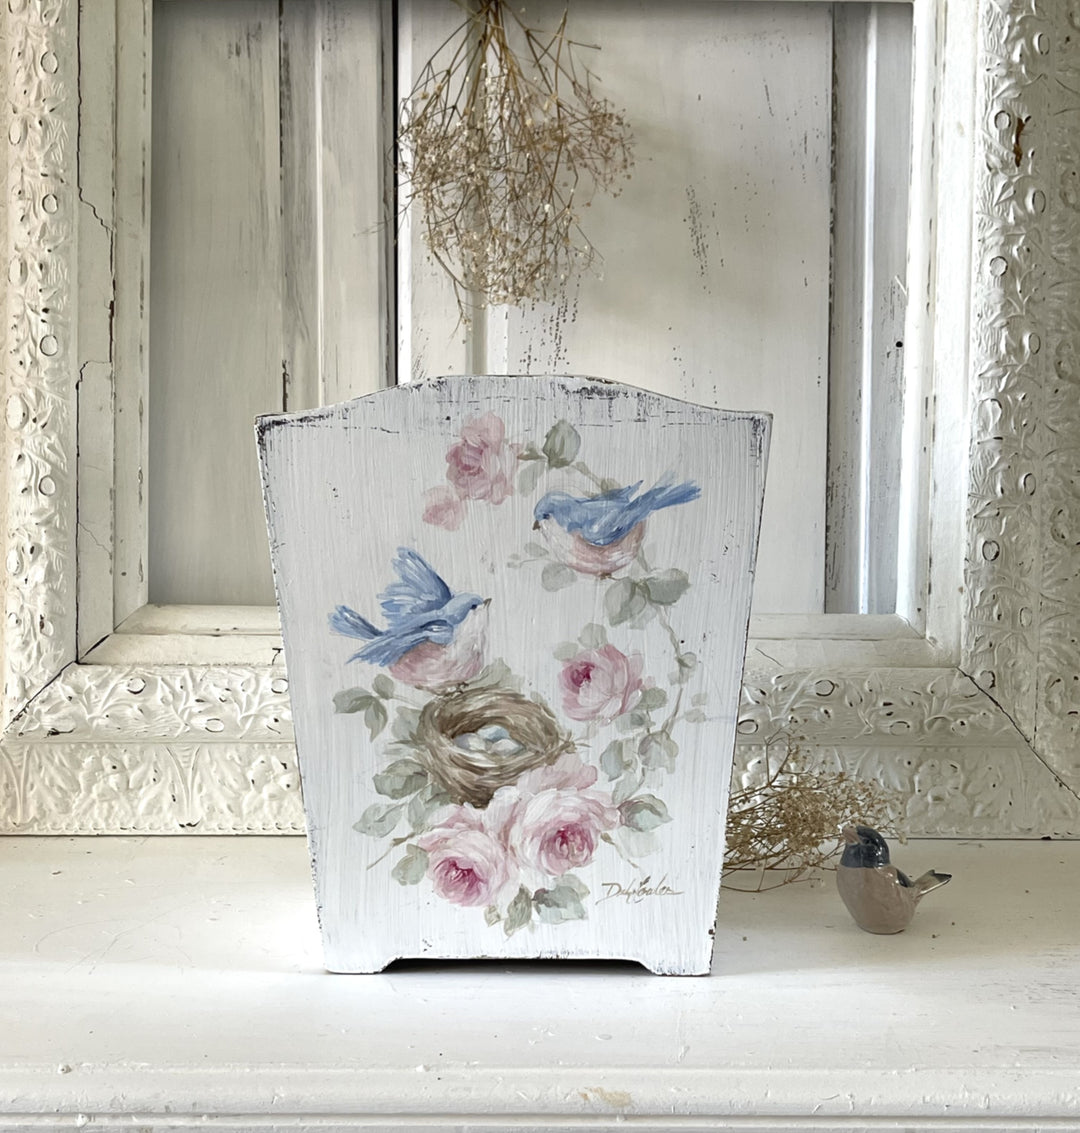 Shabby Chic Vintage Bluebirds Nest and Roses Wood Flower Vase Original by Debi Coules